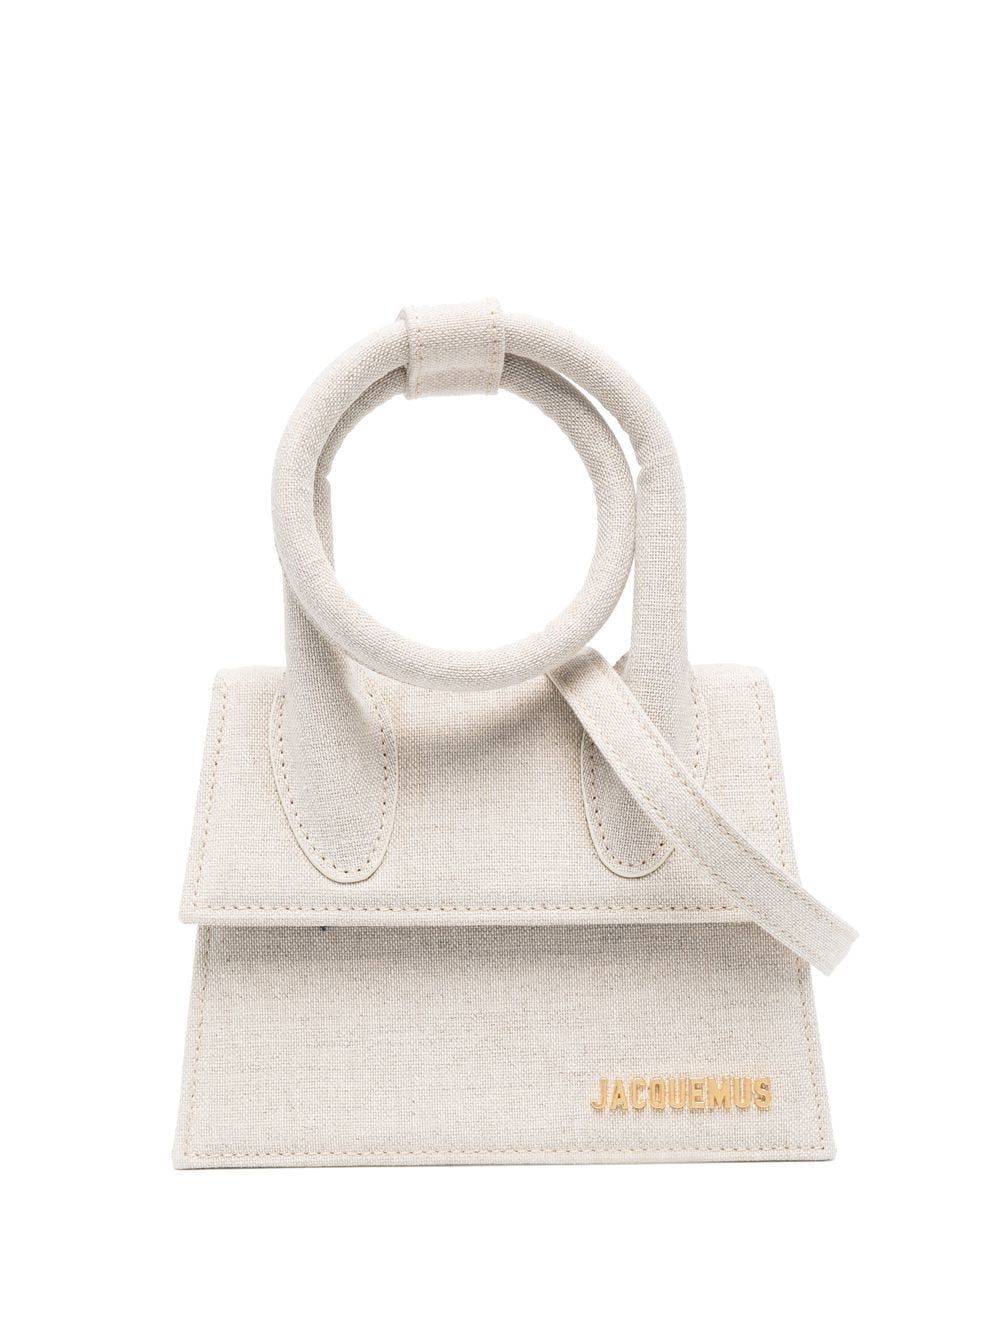 Le Chiquito Noeud canvas tote bag | Farfetch Global